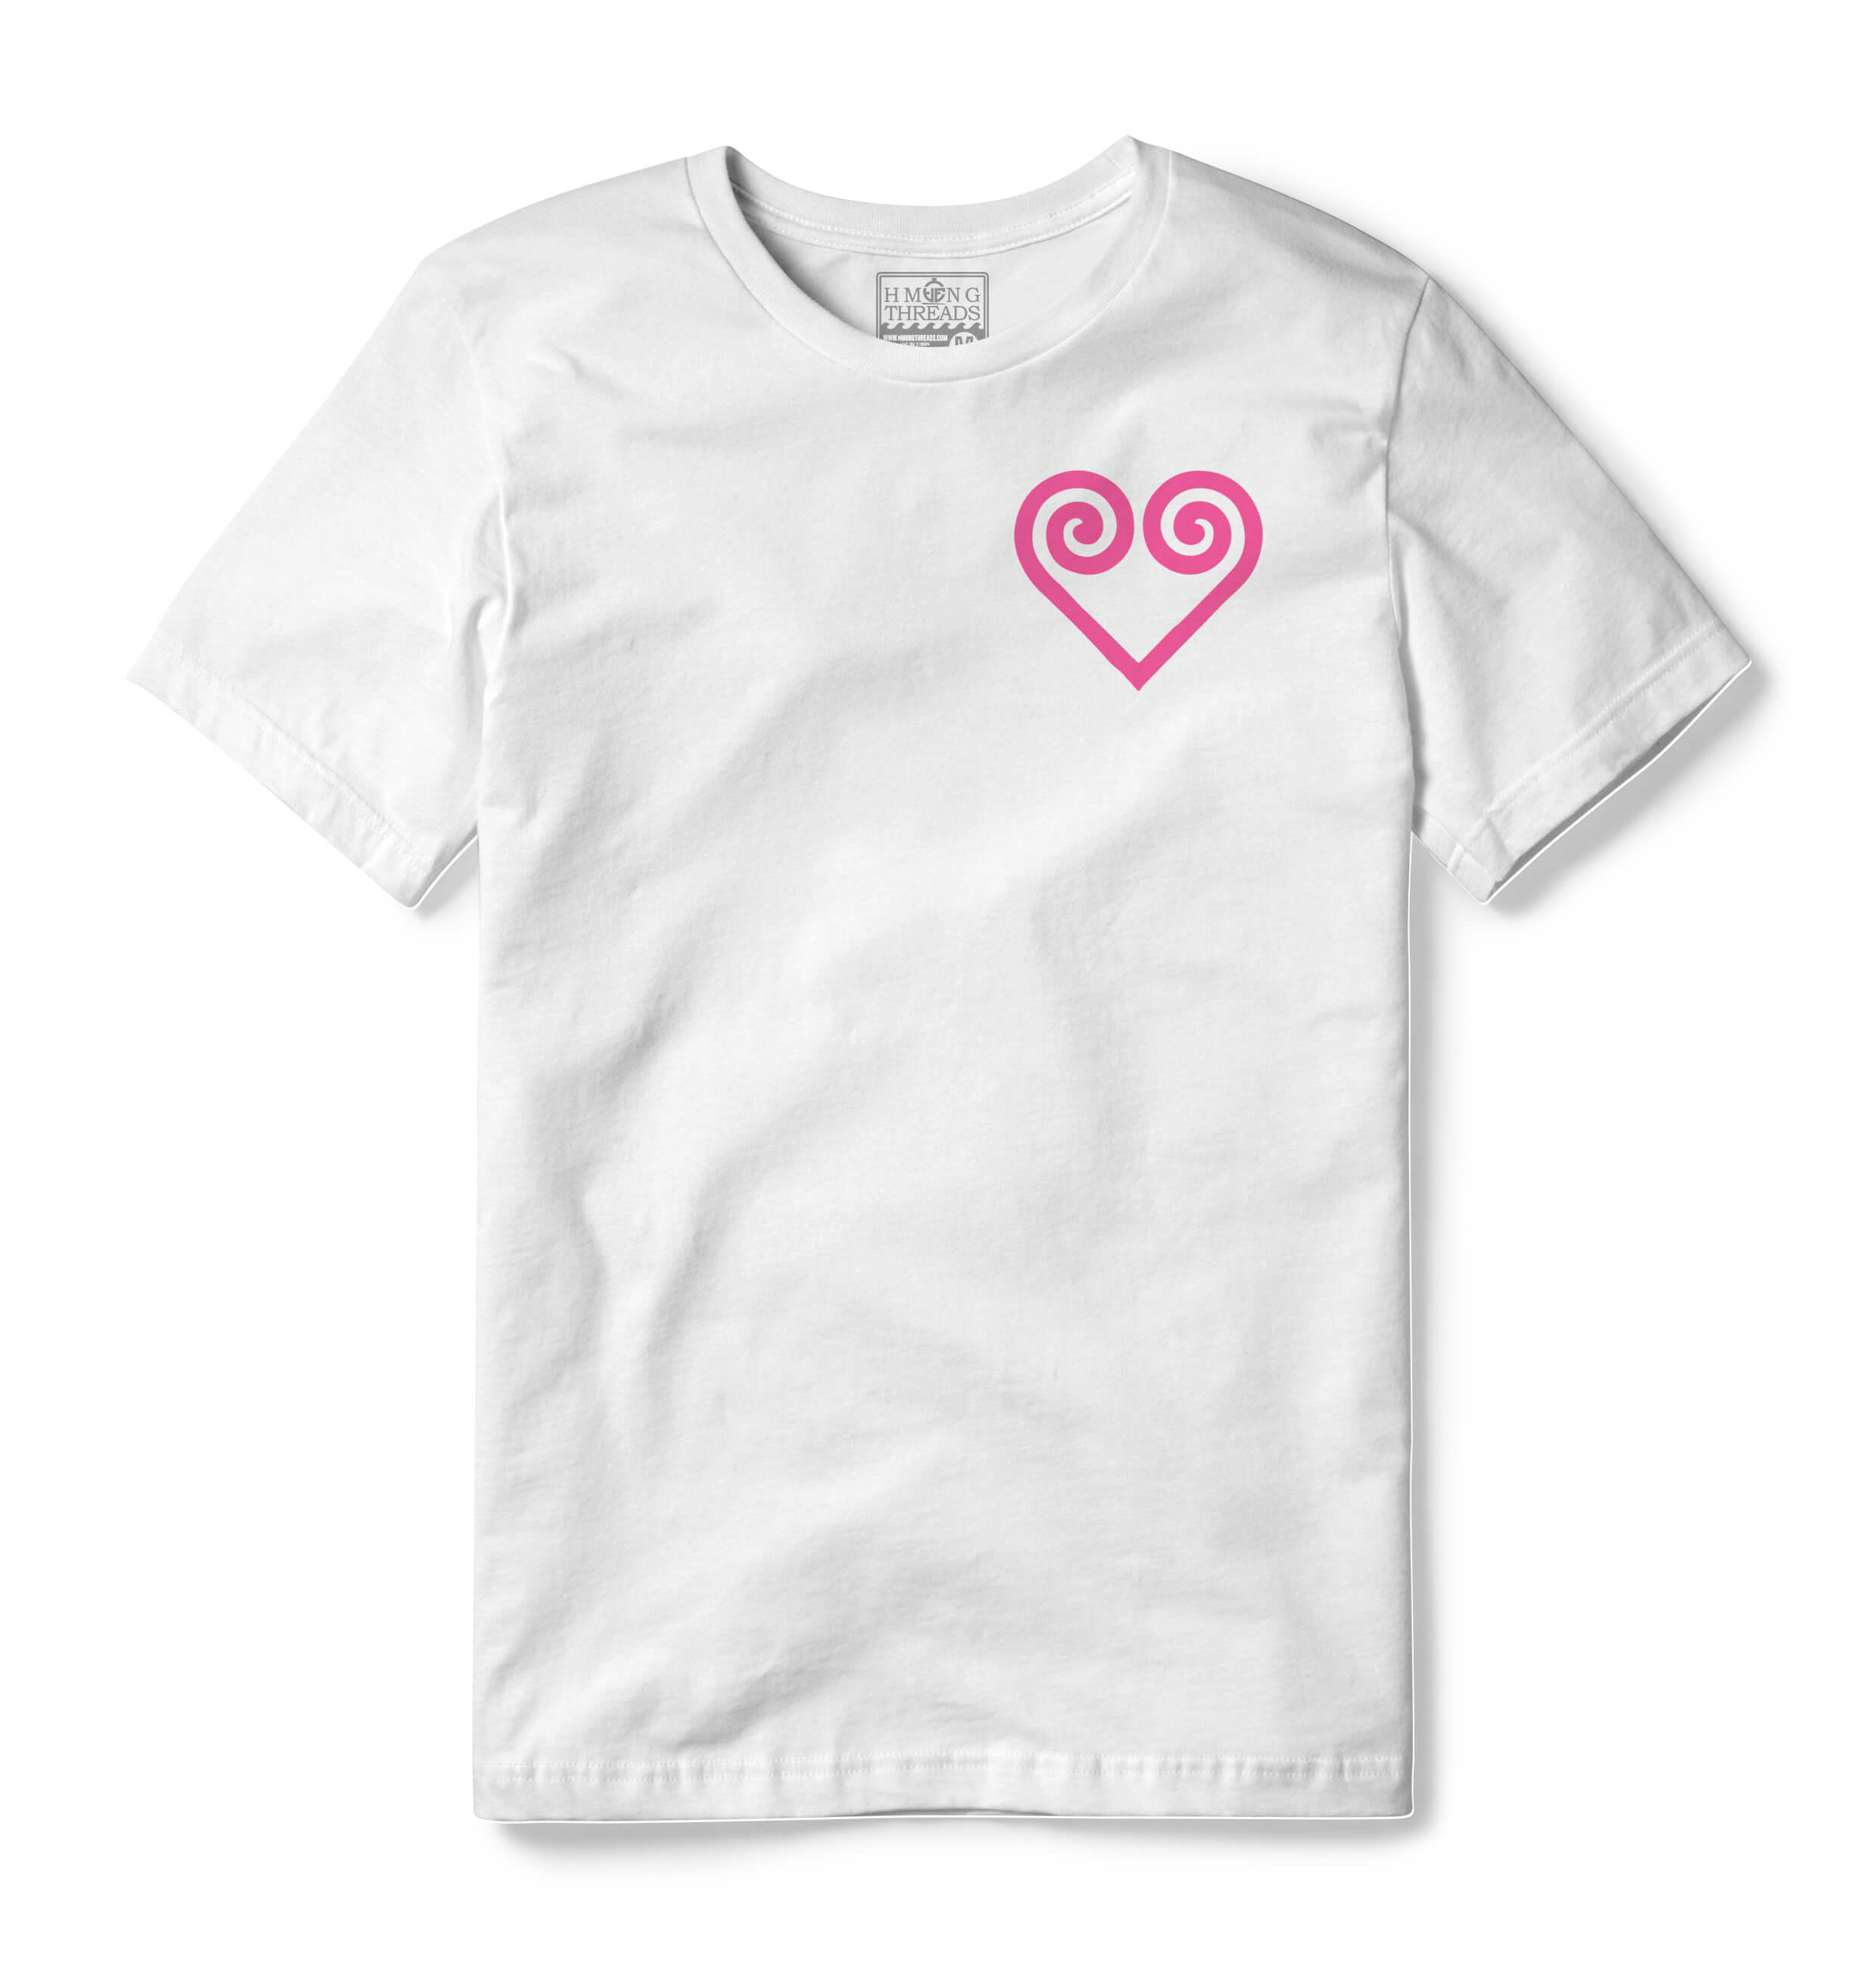 HMONG EMBROIDERY LOVE WHITE T-SHIRT